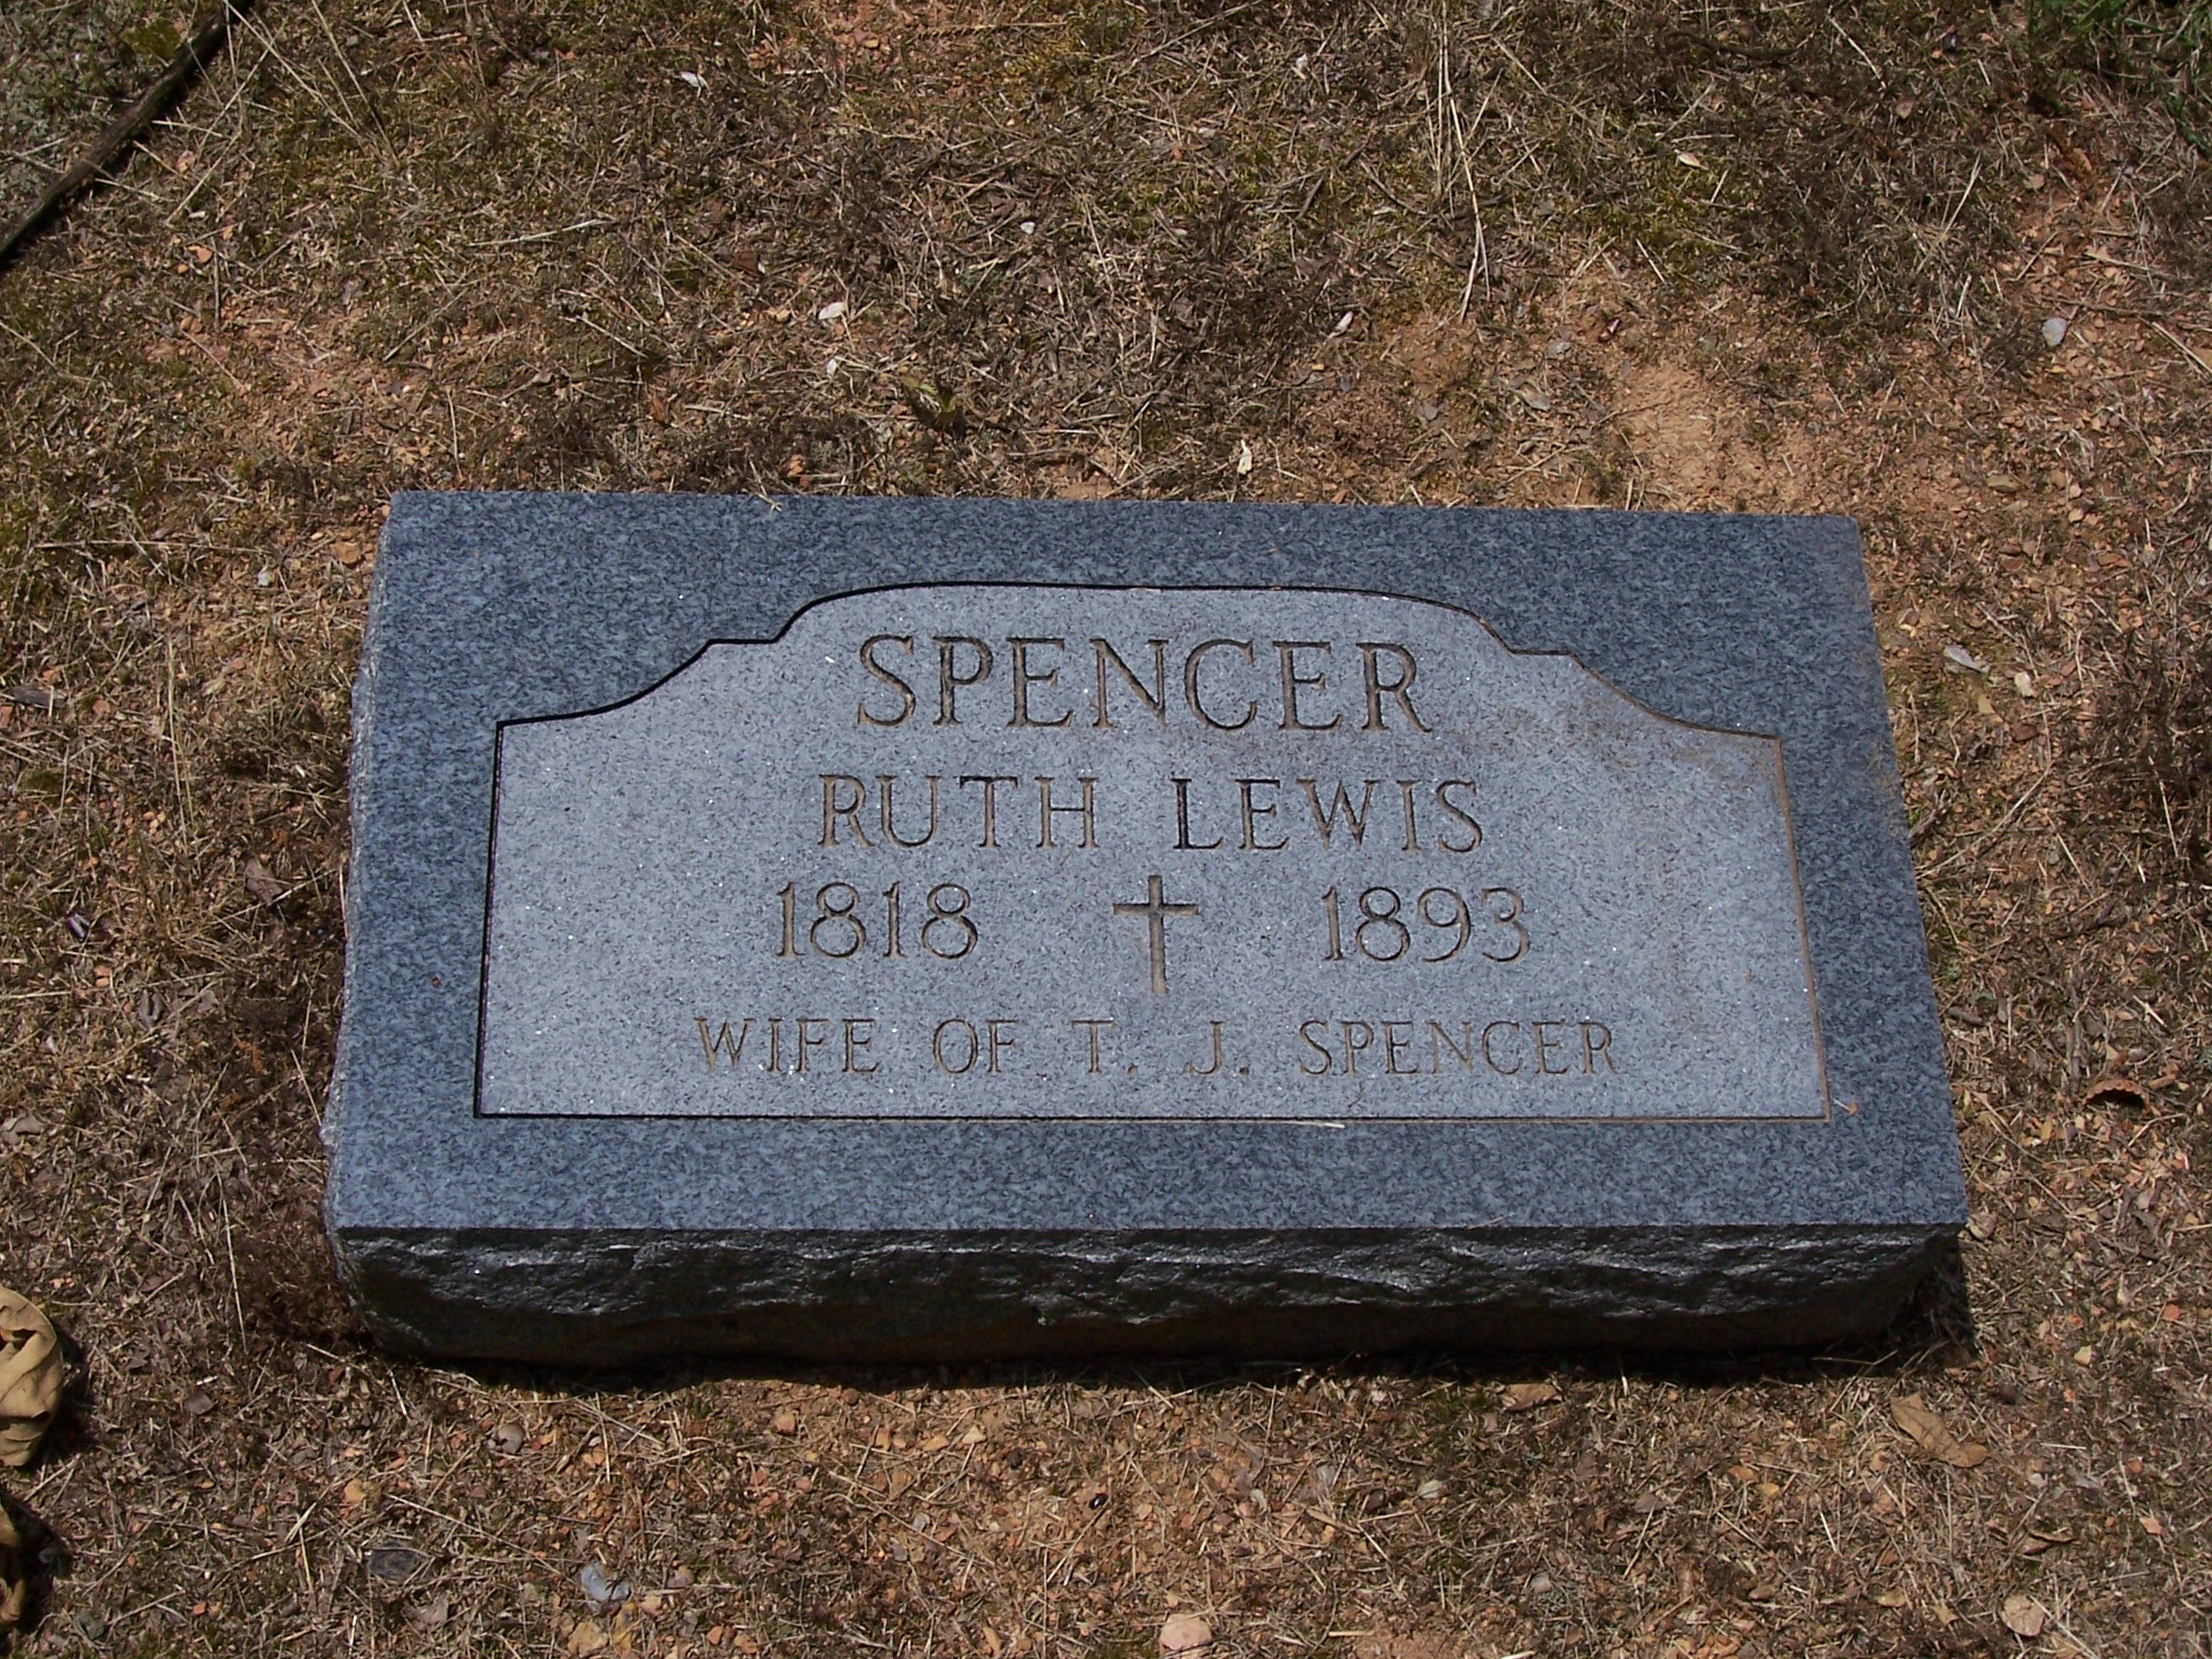 Headstone of Ruth Lewis Spencer, our Great Great Great Grandmother, buried near her husband Thomas Spencer in the Bethlehem Baptist Church of Sonoraville, Gordon County, Georgia